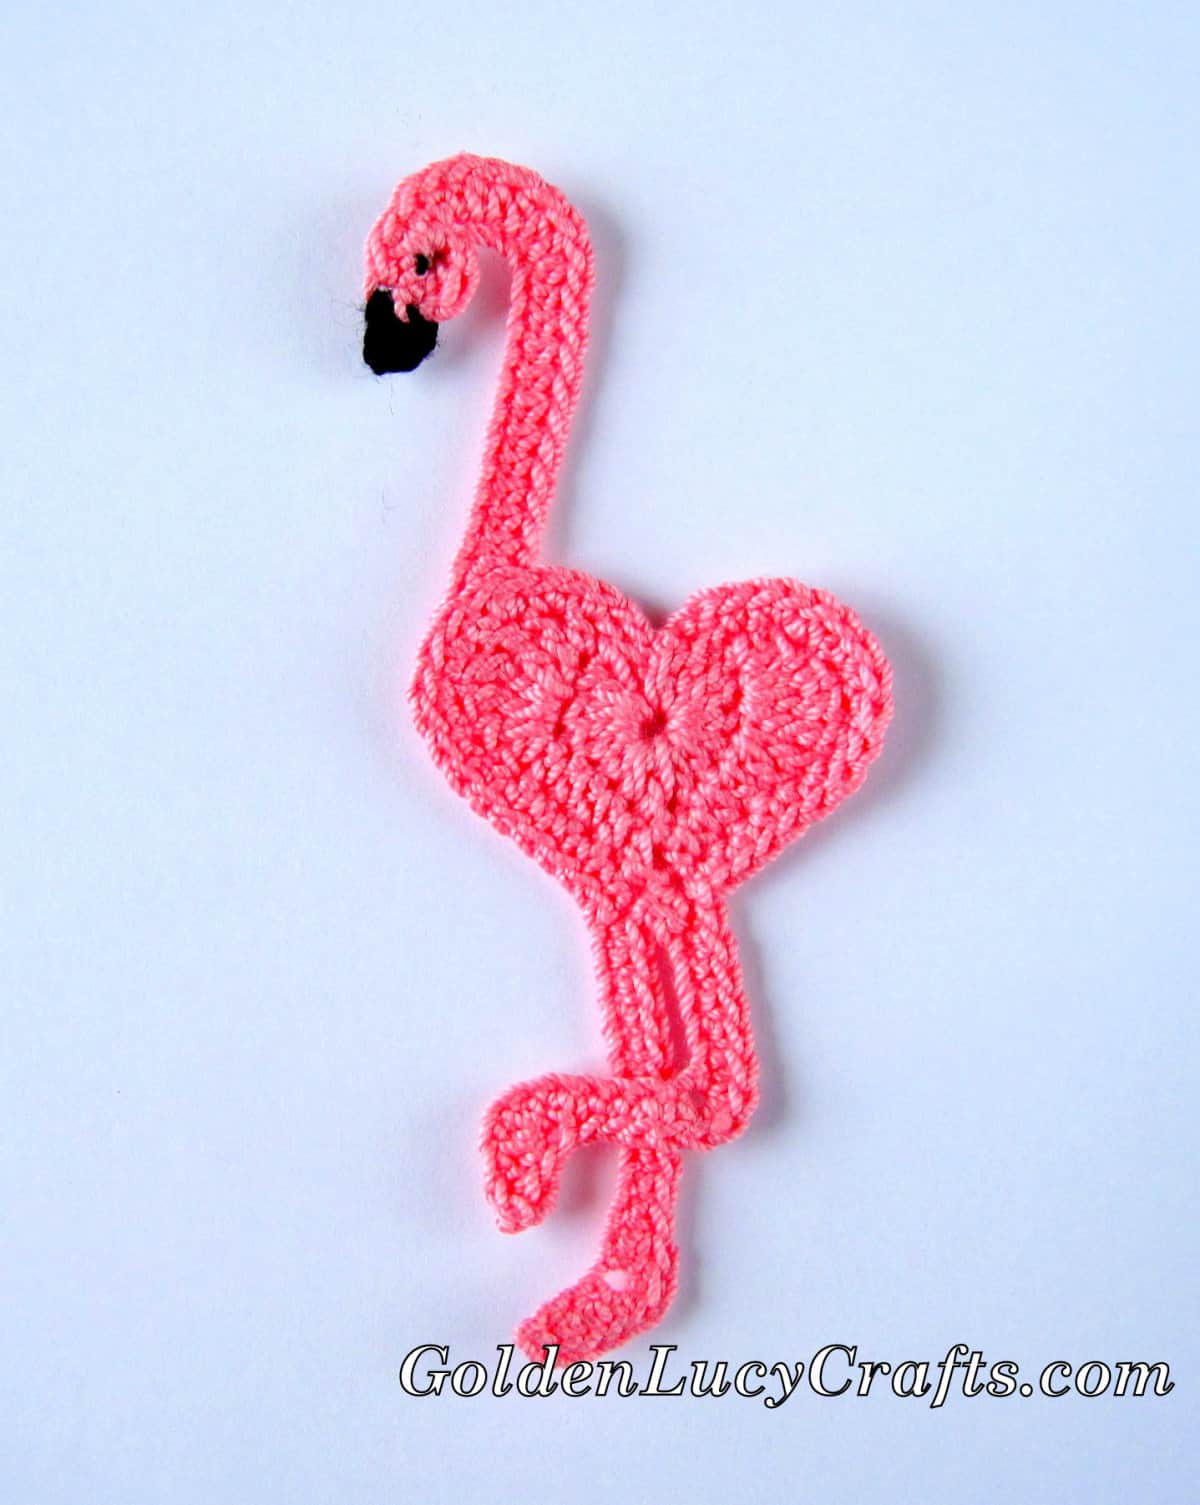 Crocheted pink heart-shaped flamingo applique.